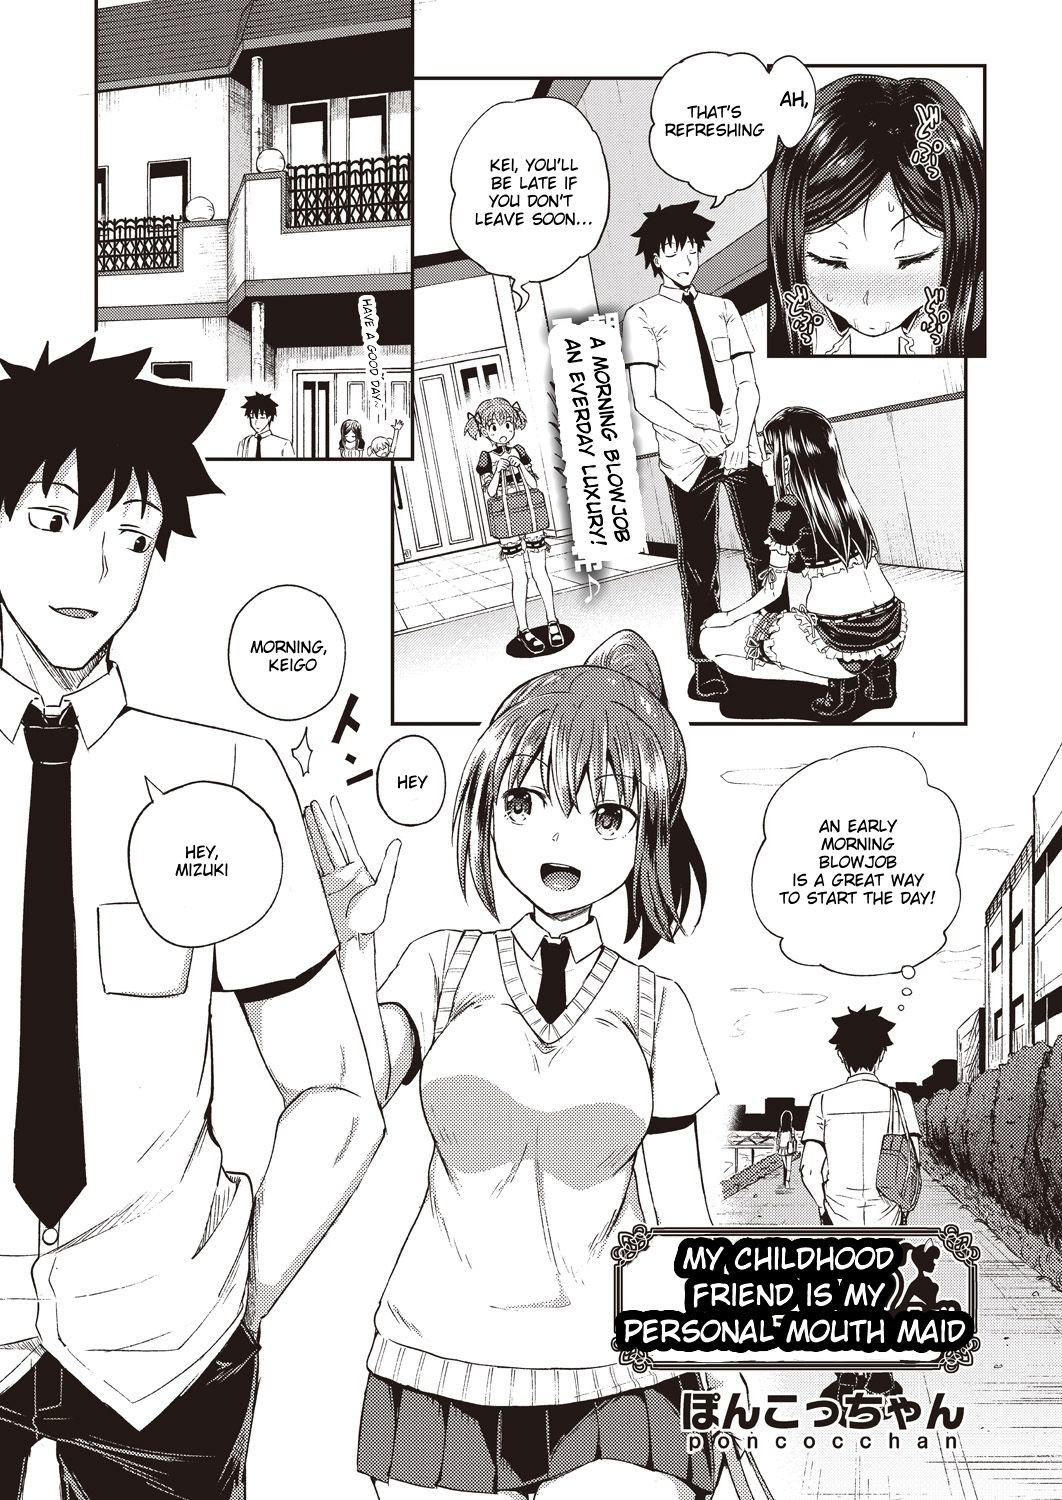 Hentai Manga Comic-My Childhood Friend is my Personal Mouth Maid-Chapter 1-1